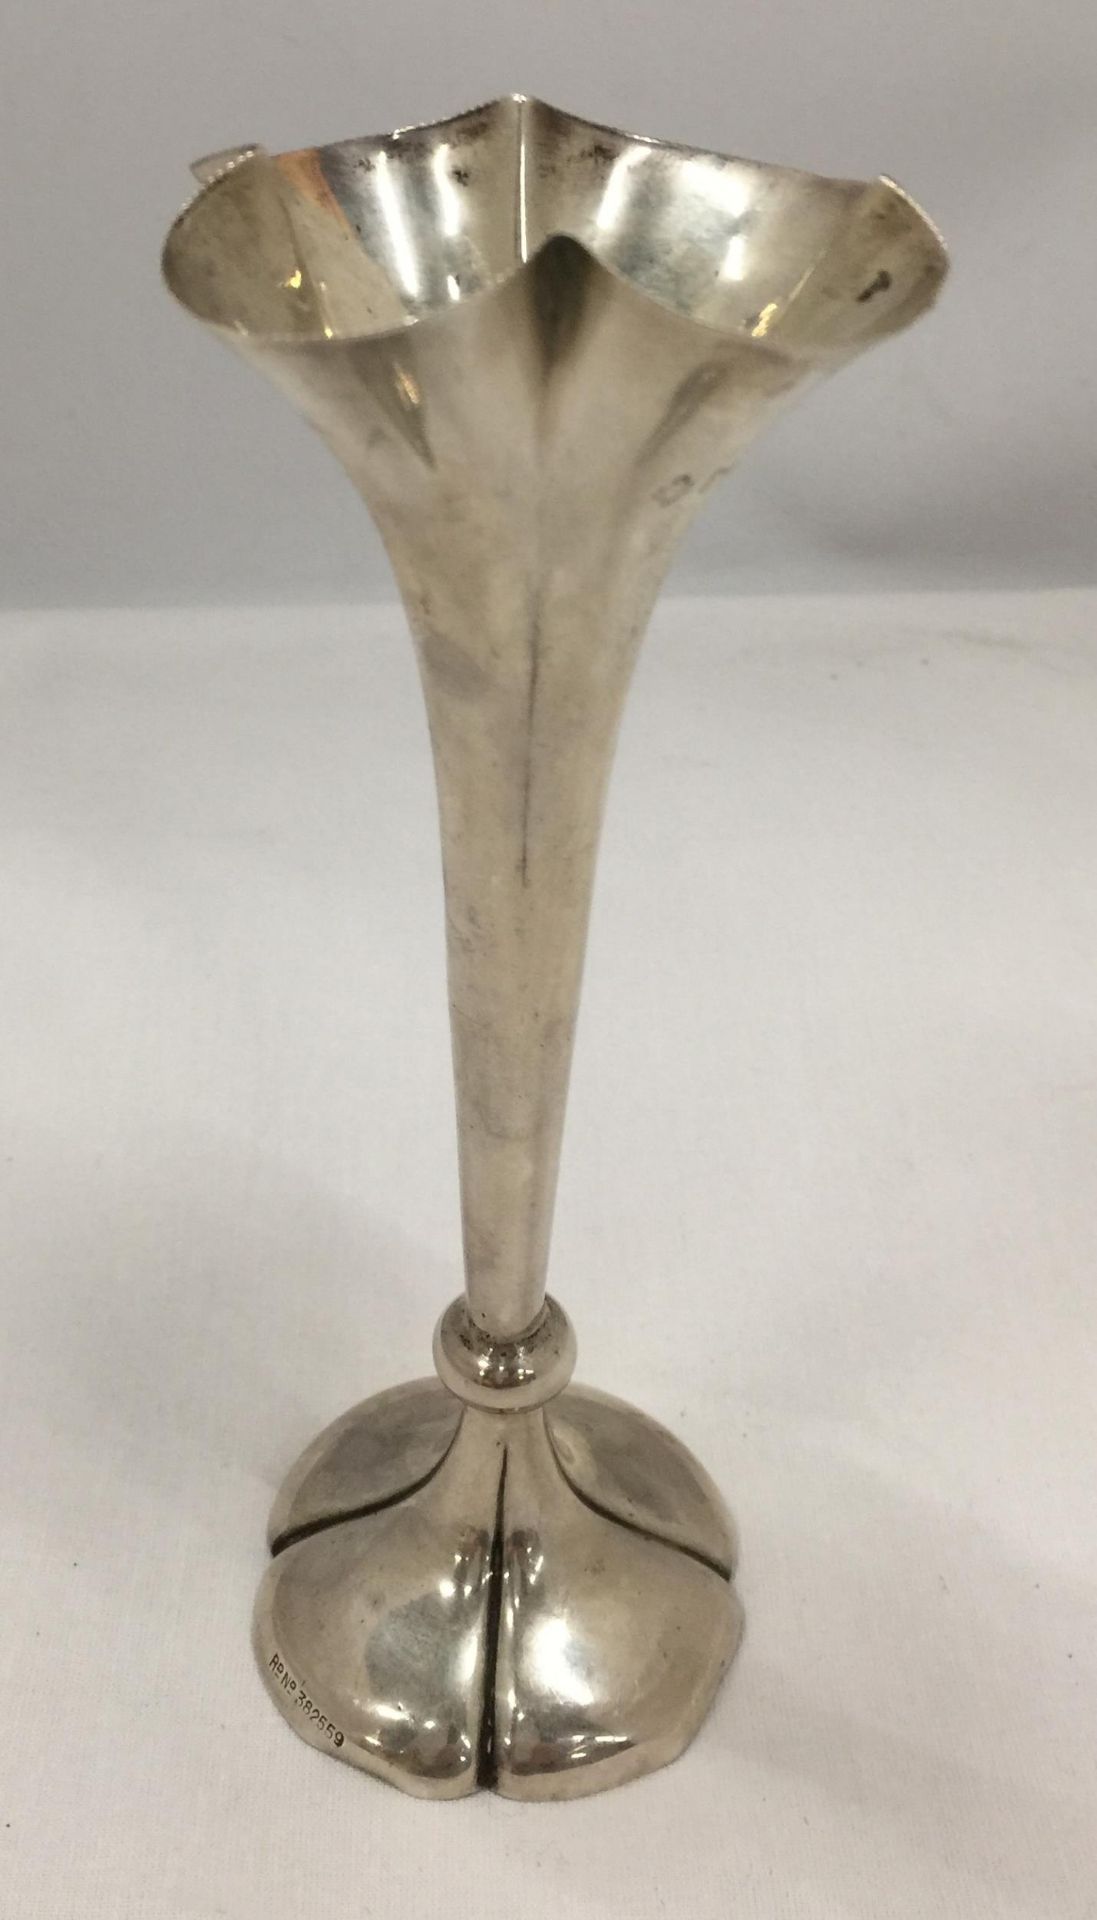 A LONDON HALLMARKED SILVER BUD VASE, WEIGHTED BASE